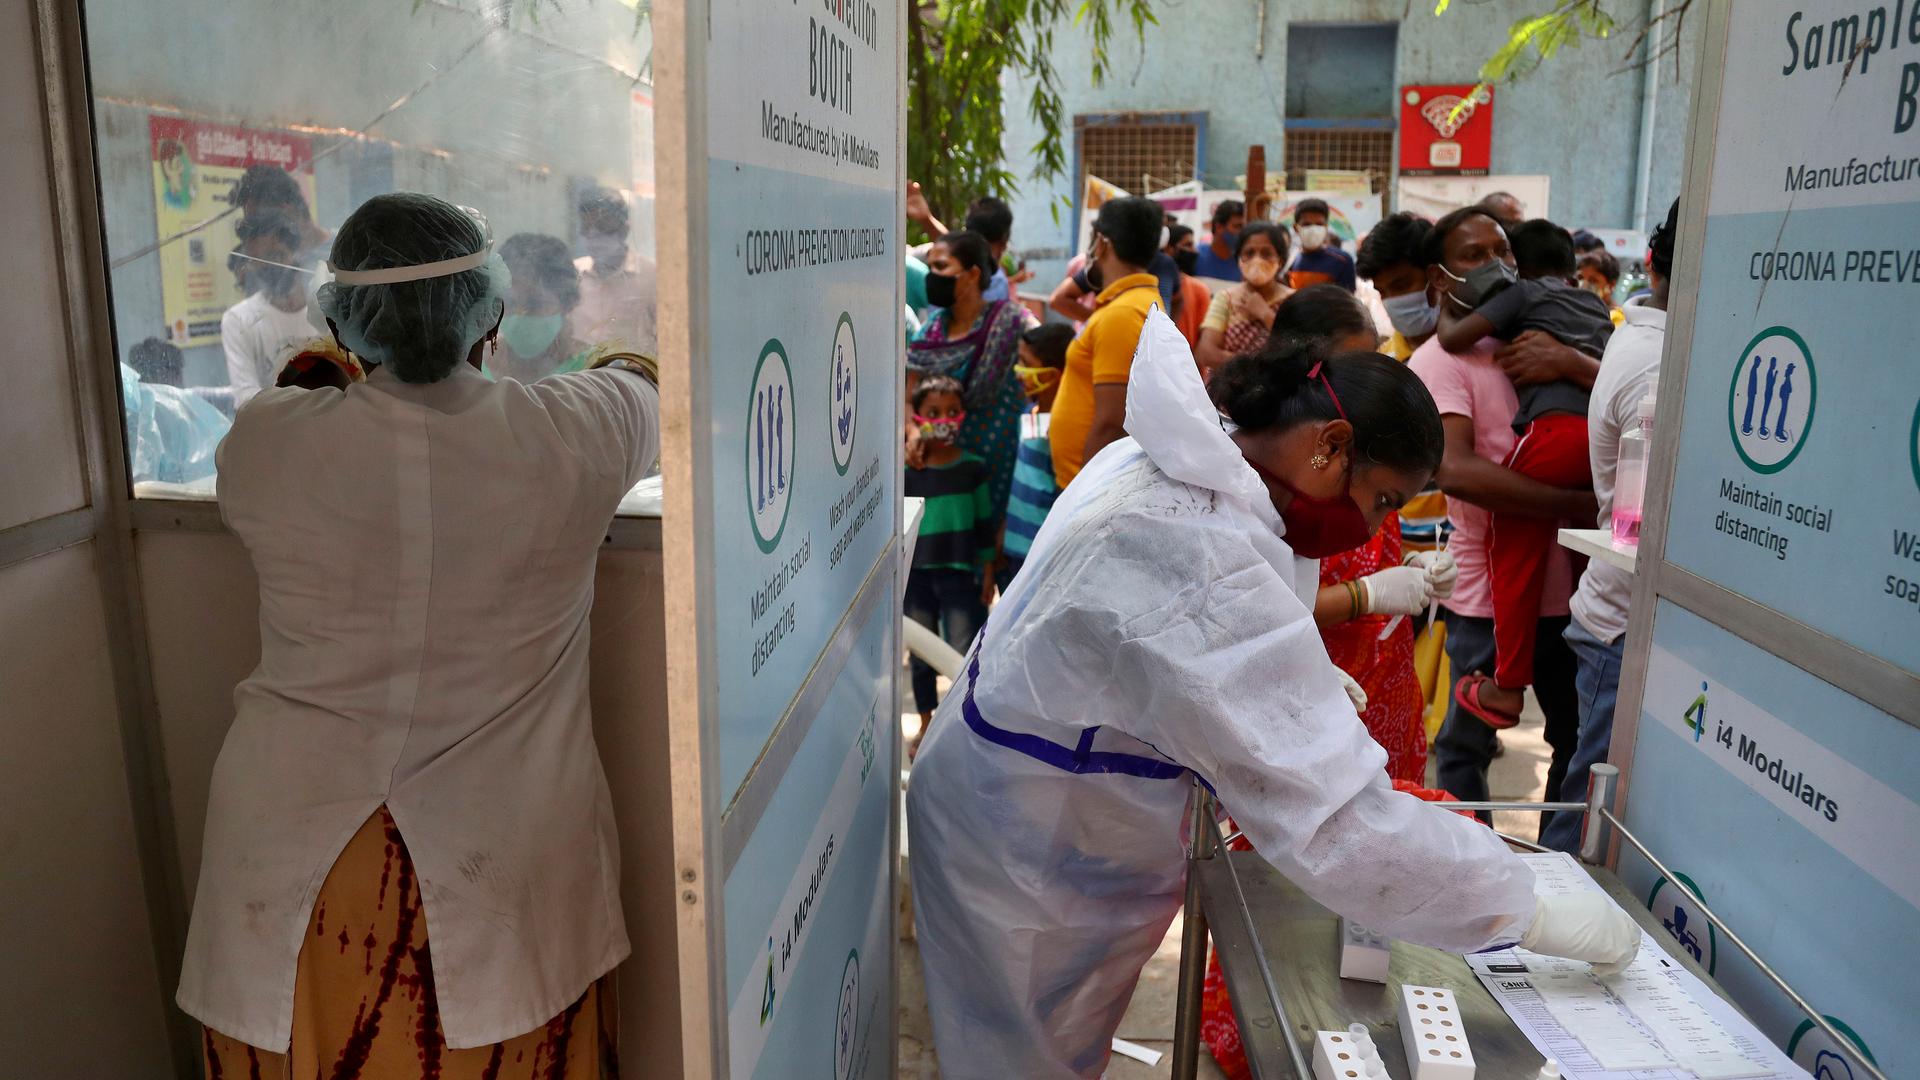 People wait their turn to get tested for COVID-19 in Hyderabad, India, April 25, 2021.